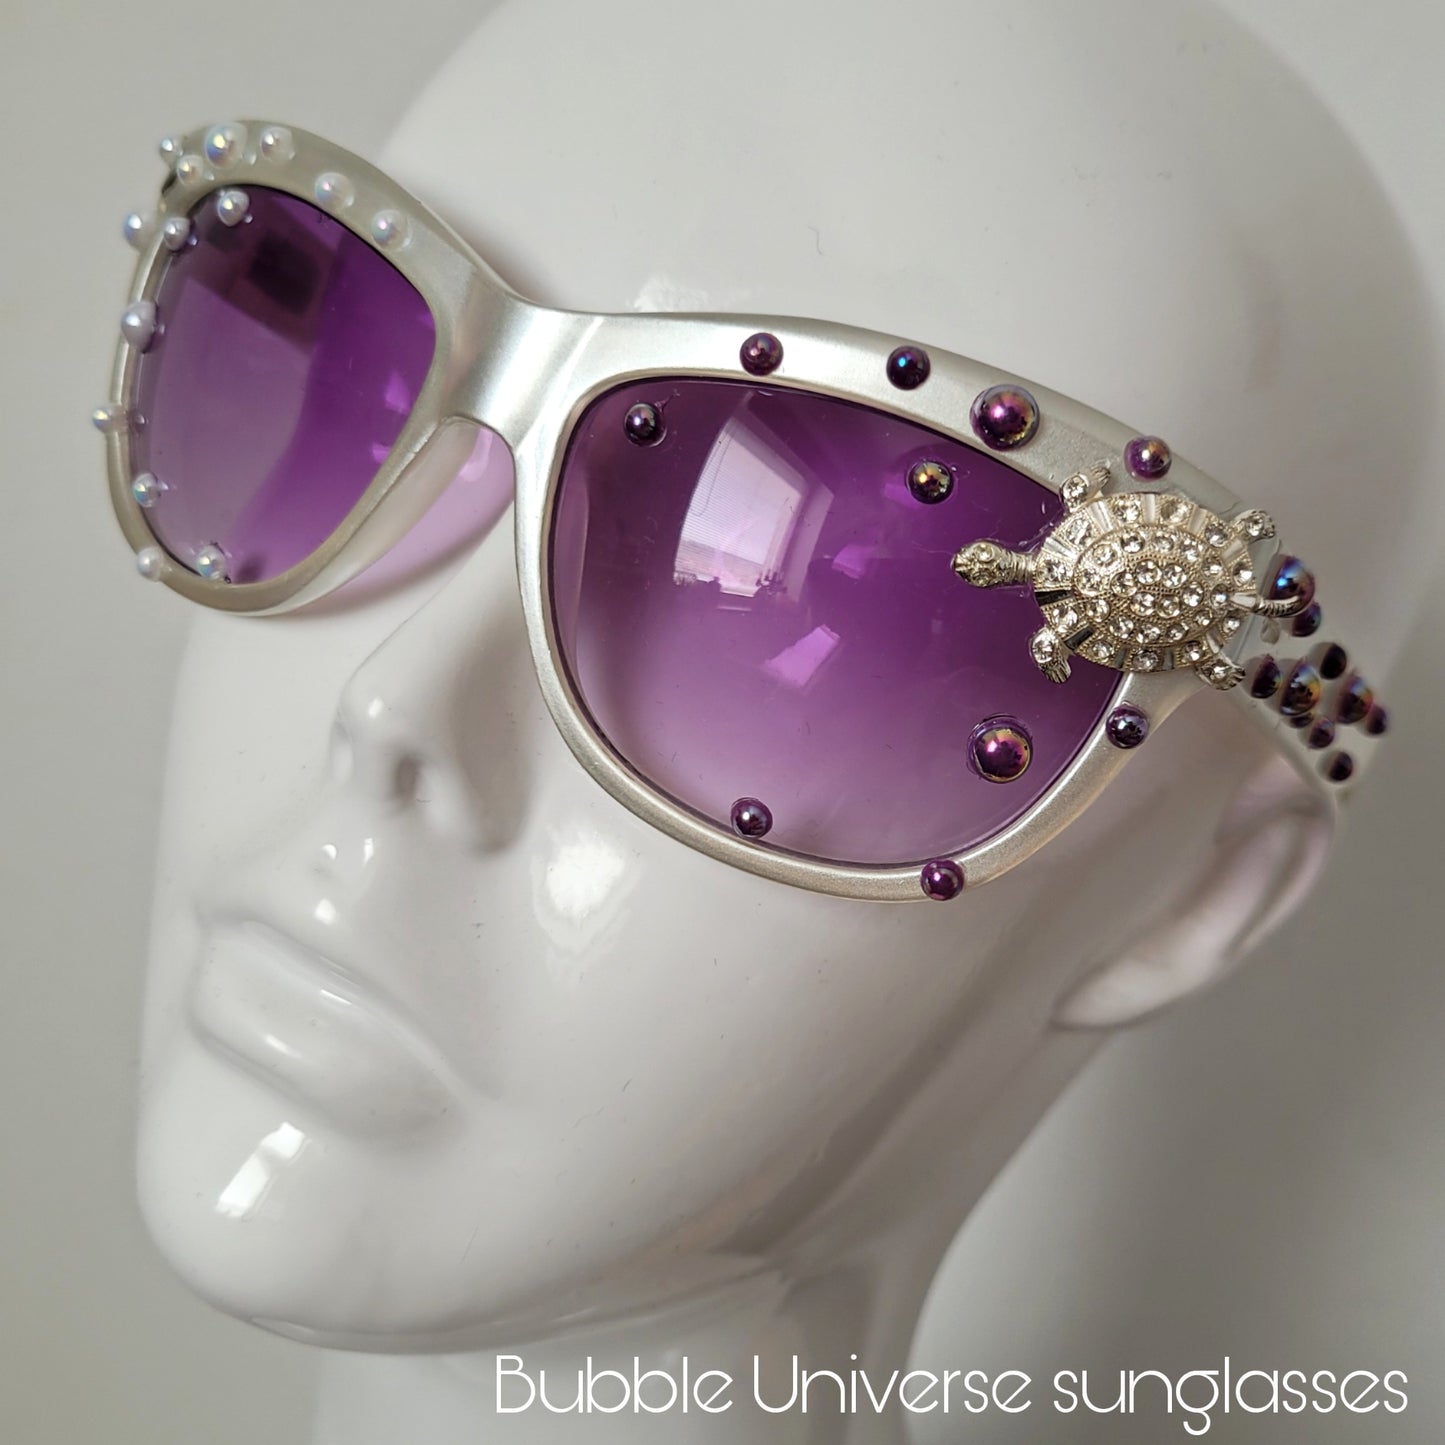 Shifting Depths collection: the Bubble Universe sunglasses